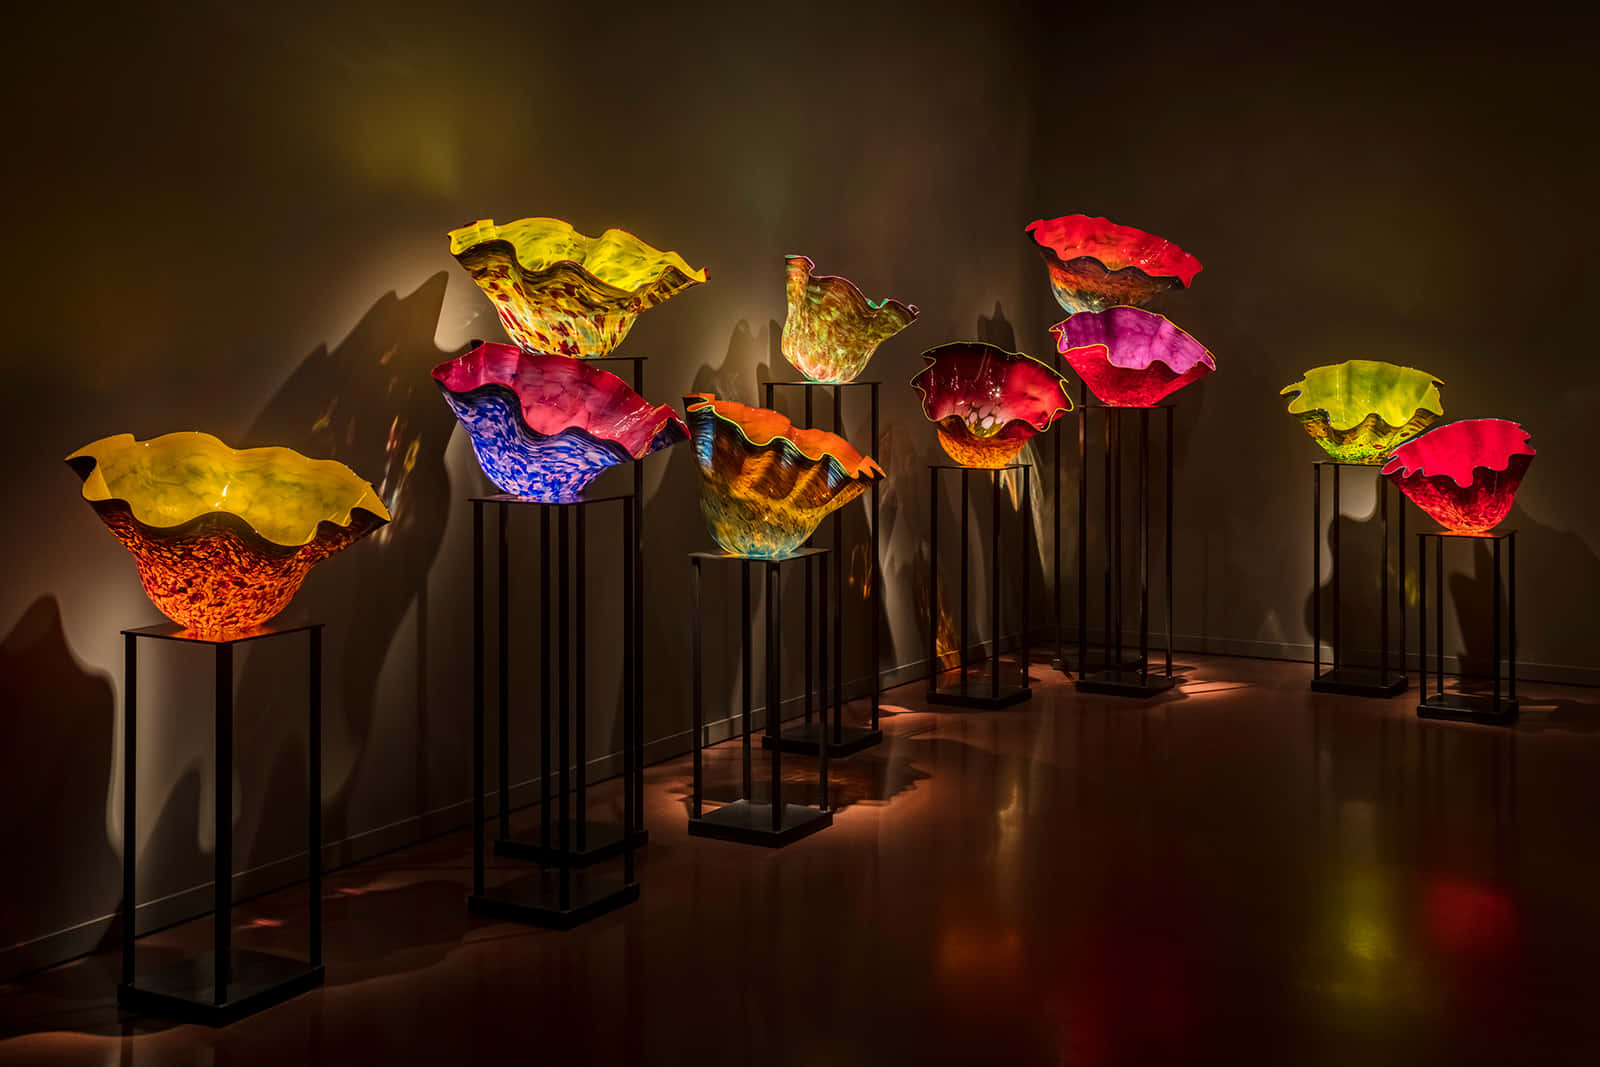 Chihuly Glass Flower Exhibit Wallpaper